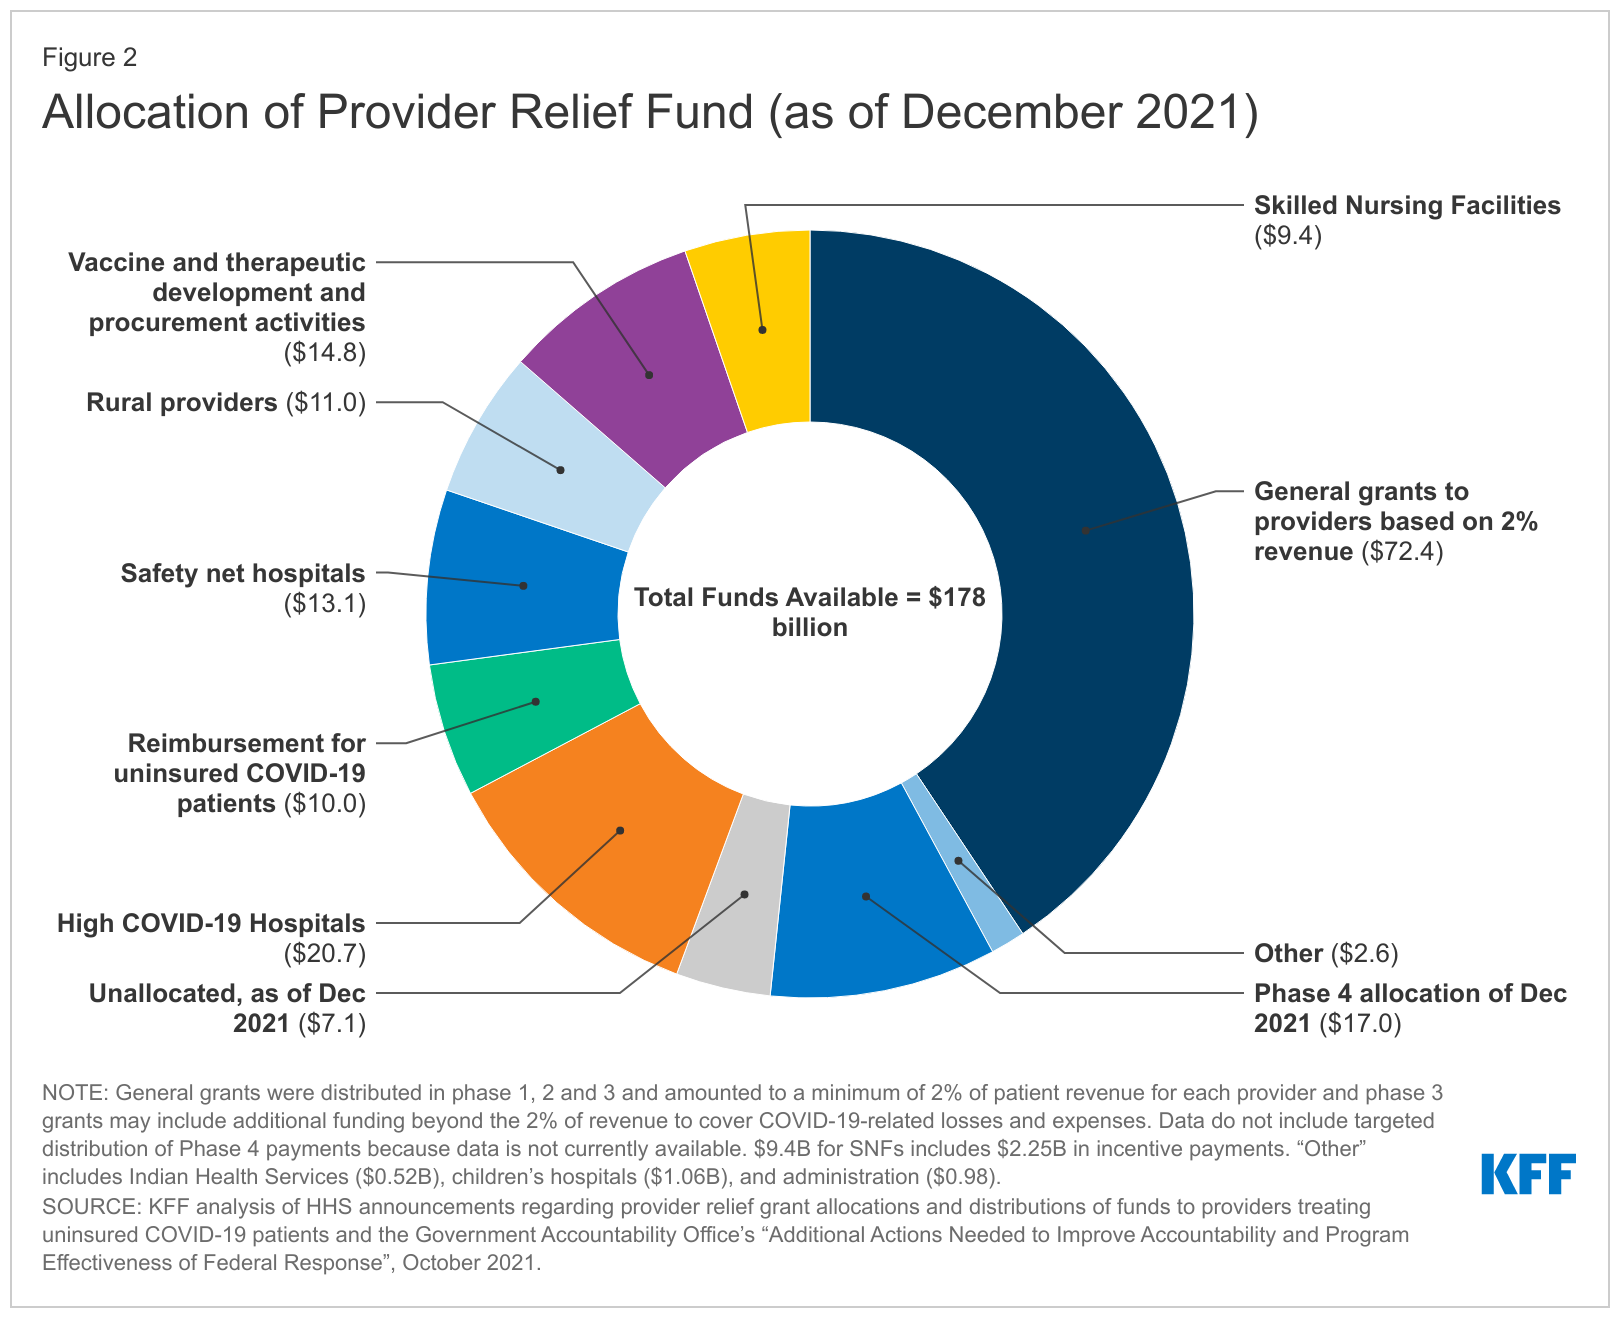 Funding for Health Care Providers During the Pandemic: An Update